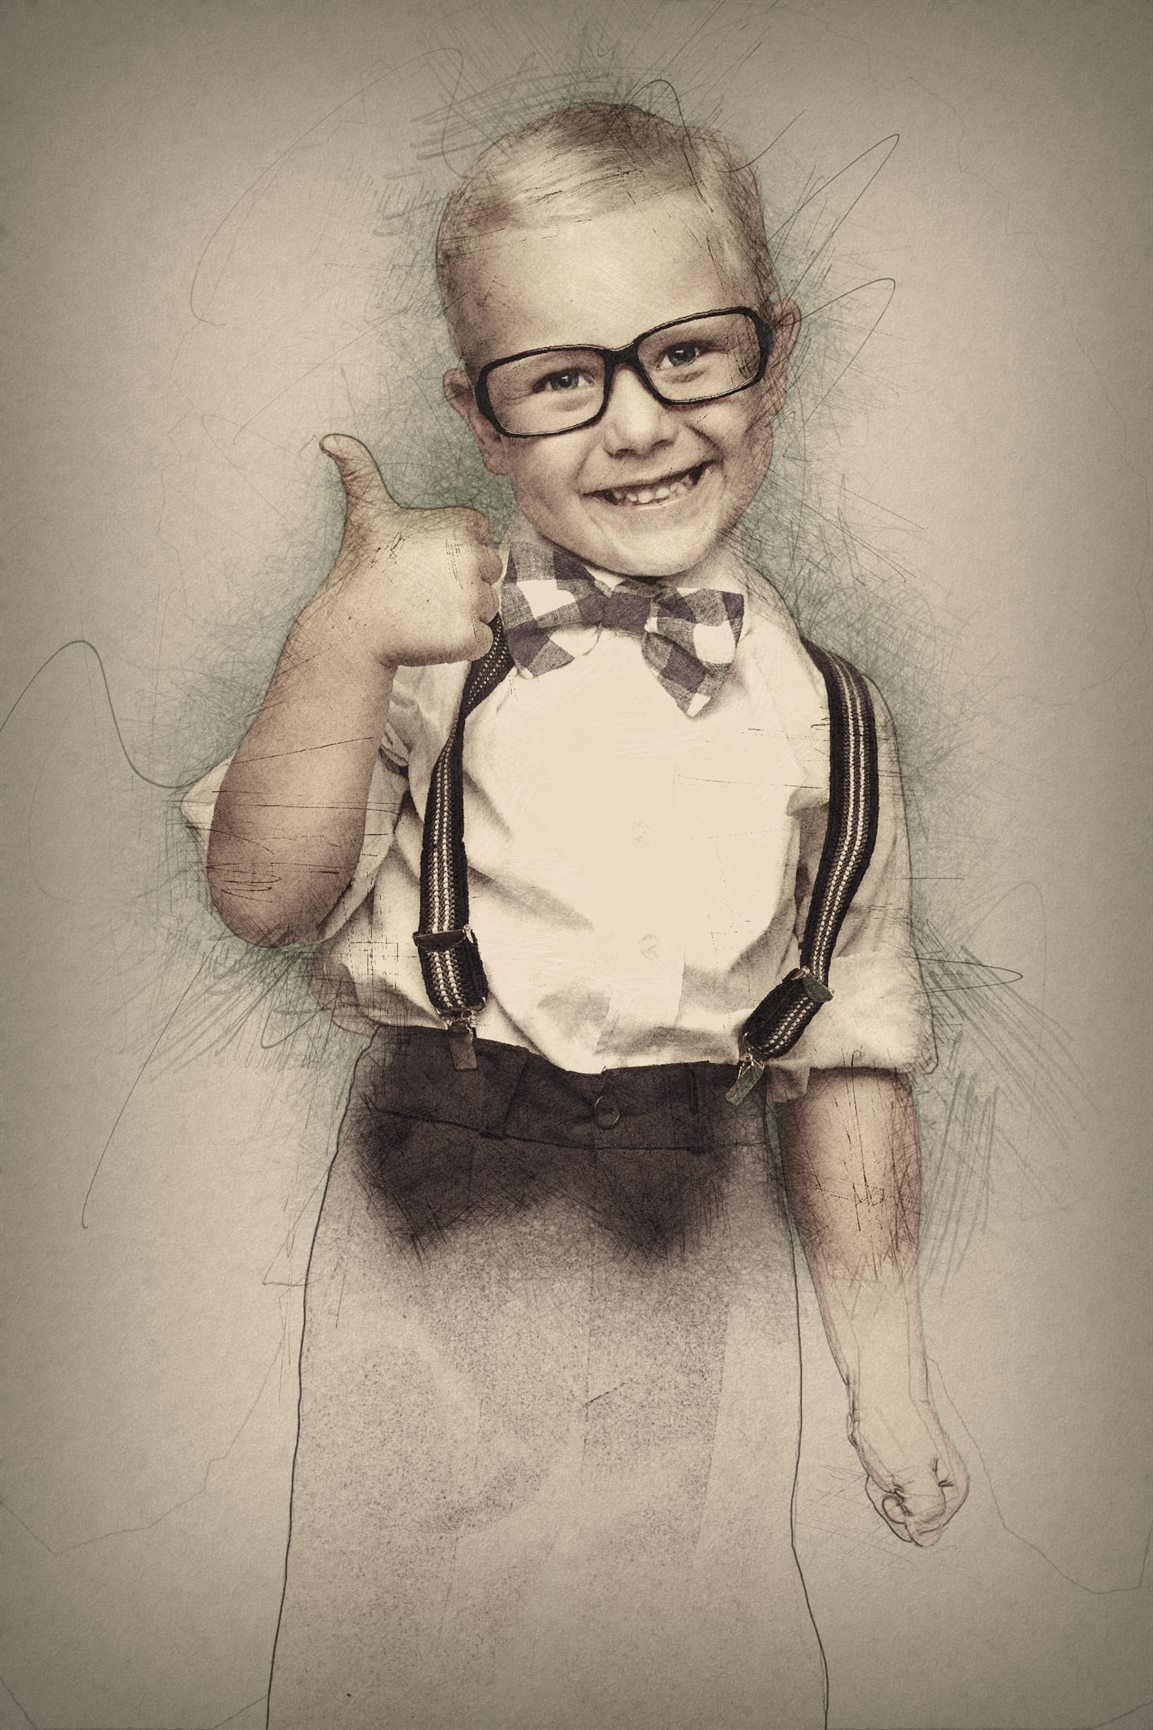 Image of a baby in glasses.